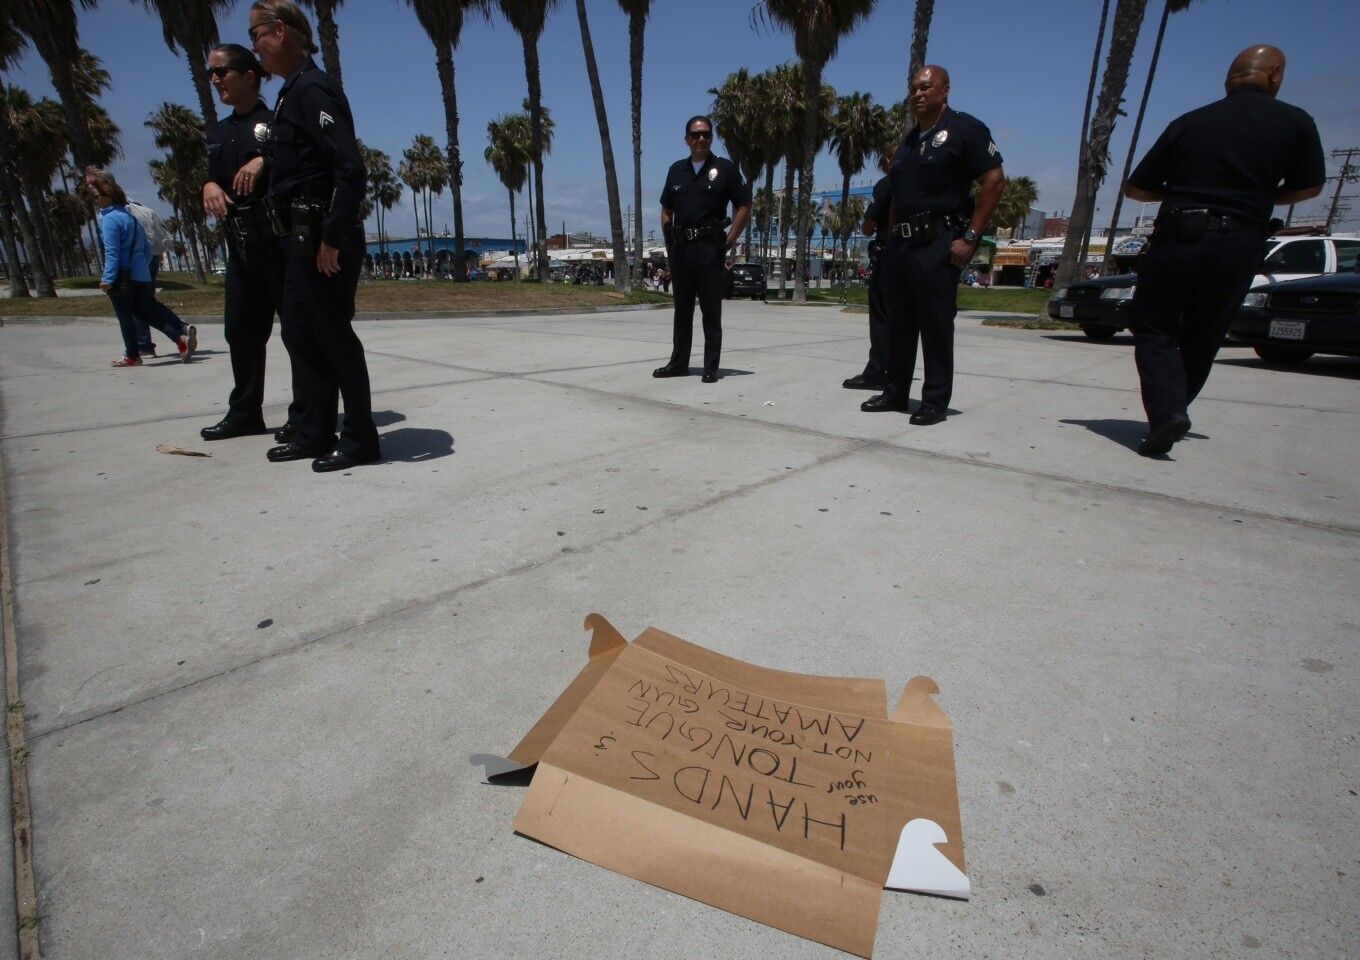 LAPD officers keep an eye on protesters near the site of a fatal LAPD officer-involved shooting in Venice.